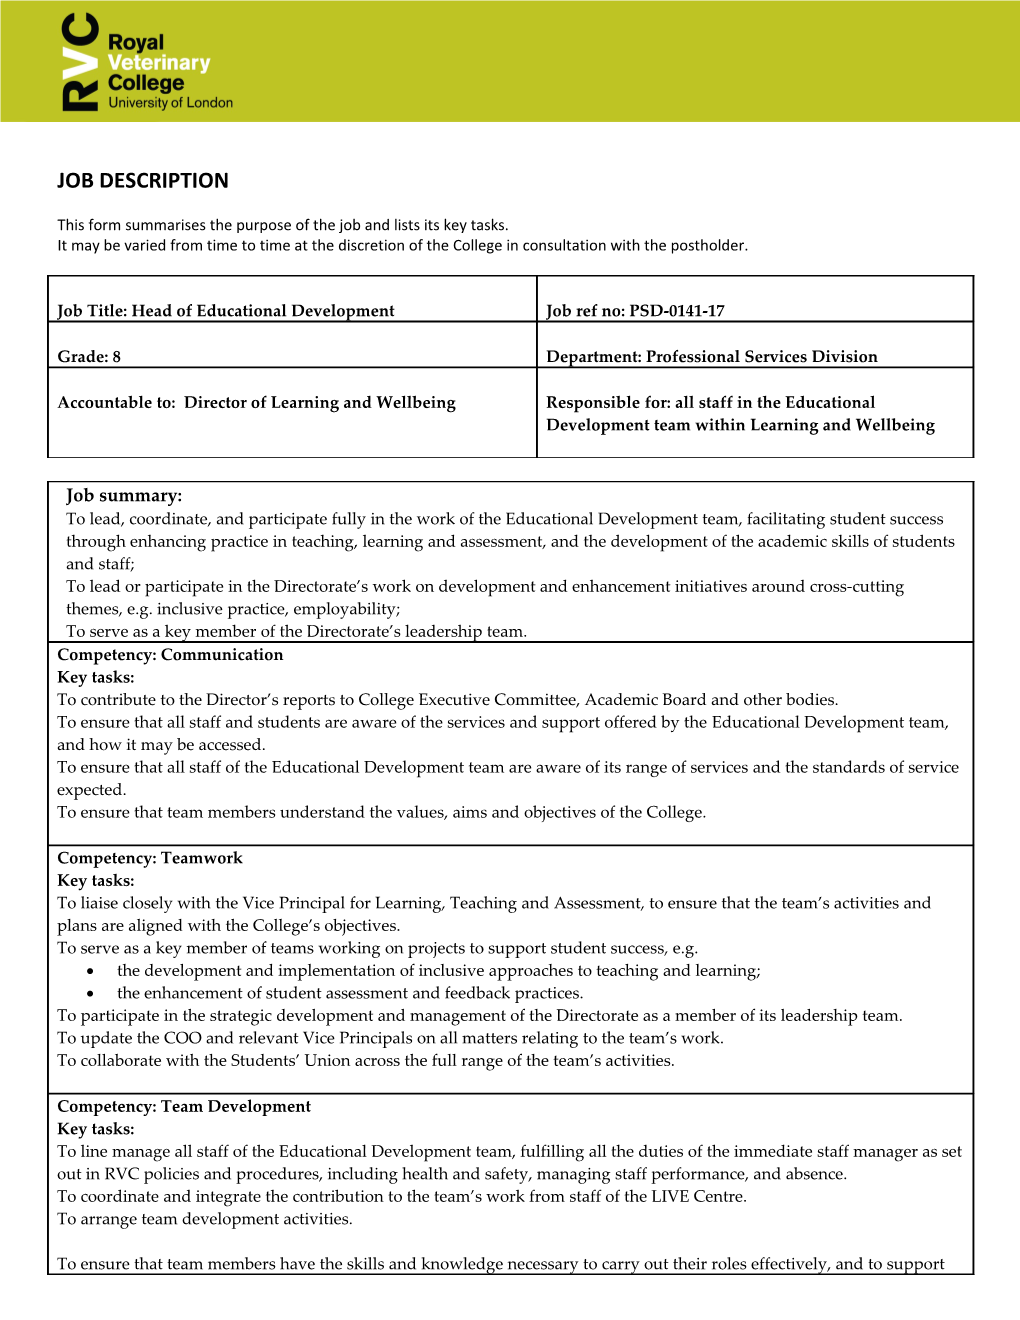 This Form Summarises the Purpose of the Job and Lists Its Key Tasks s4